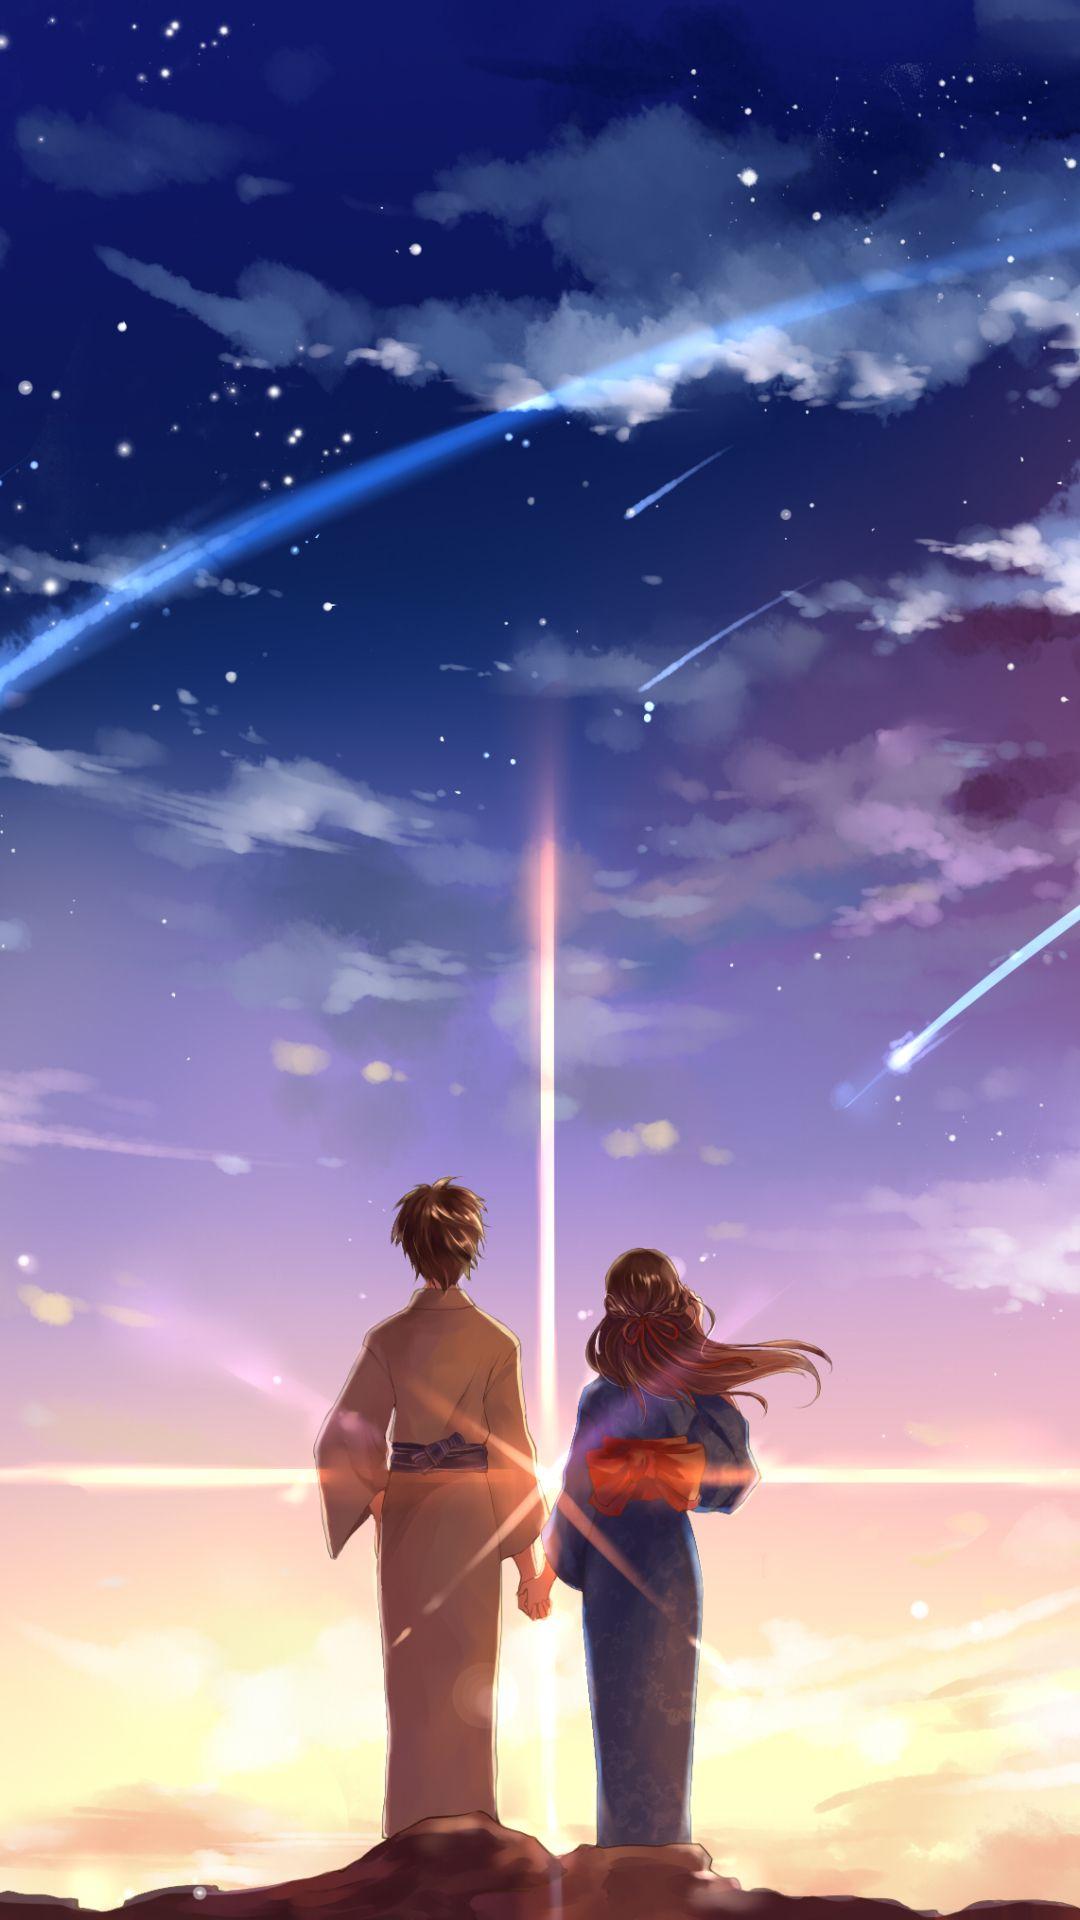 Your Name. Apple IPhone 6 (750x1334) Wallpaper